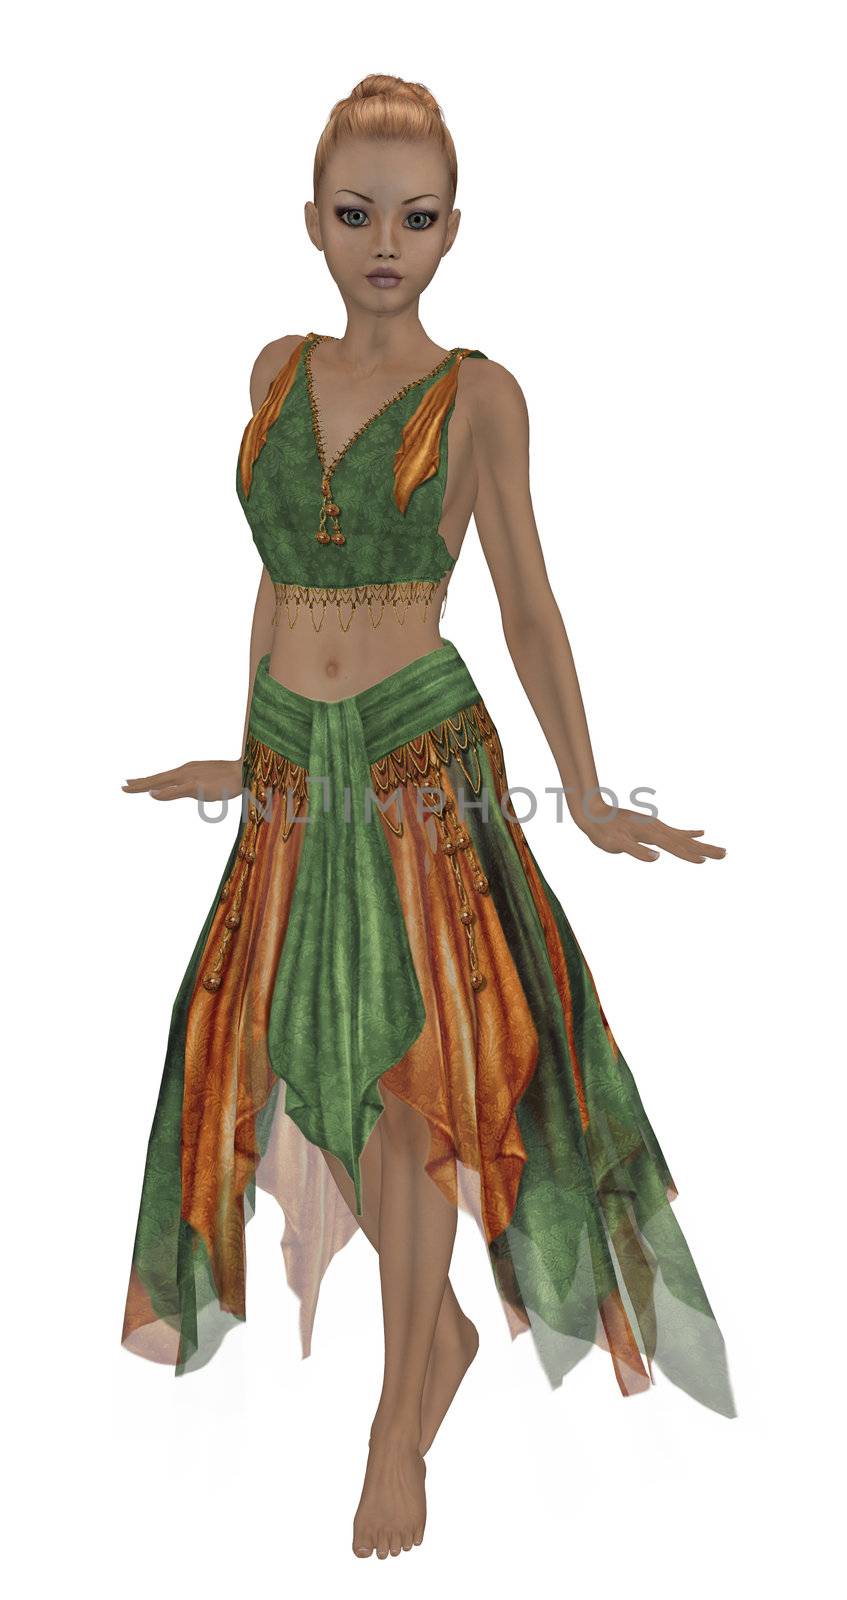 Orange and green fairy standing up